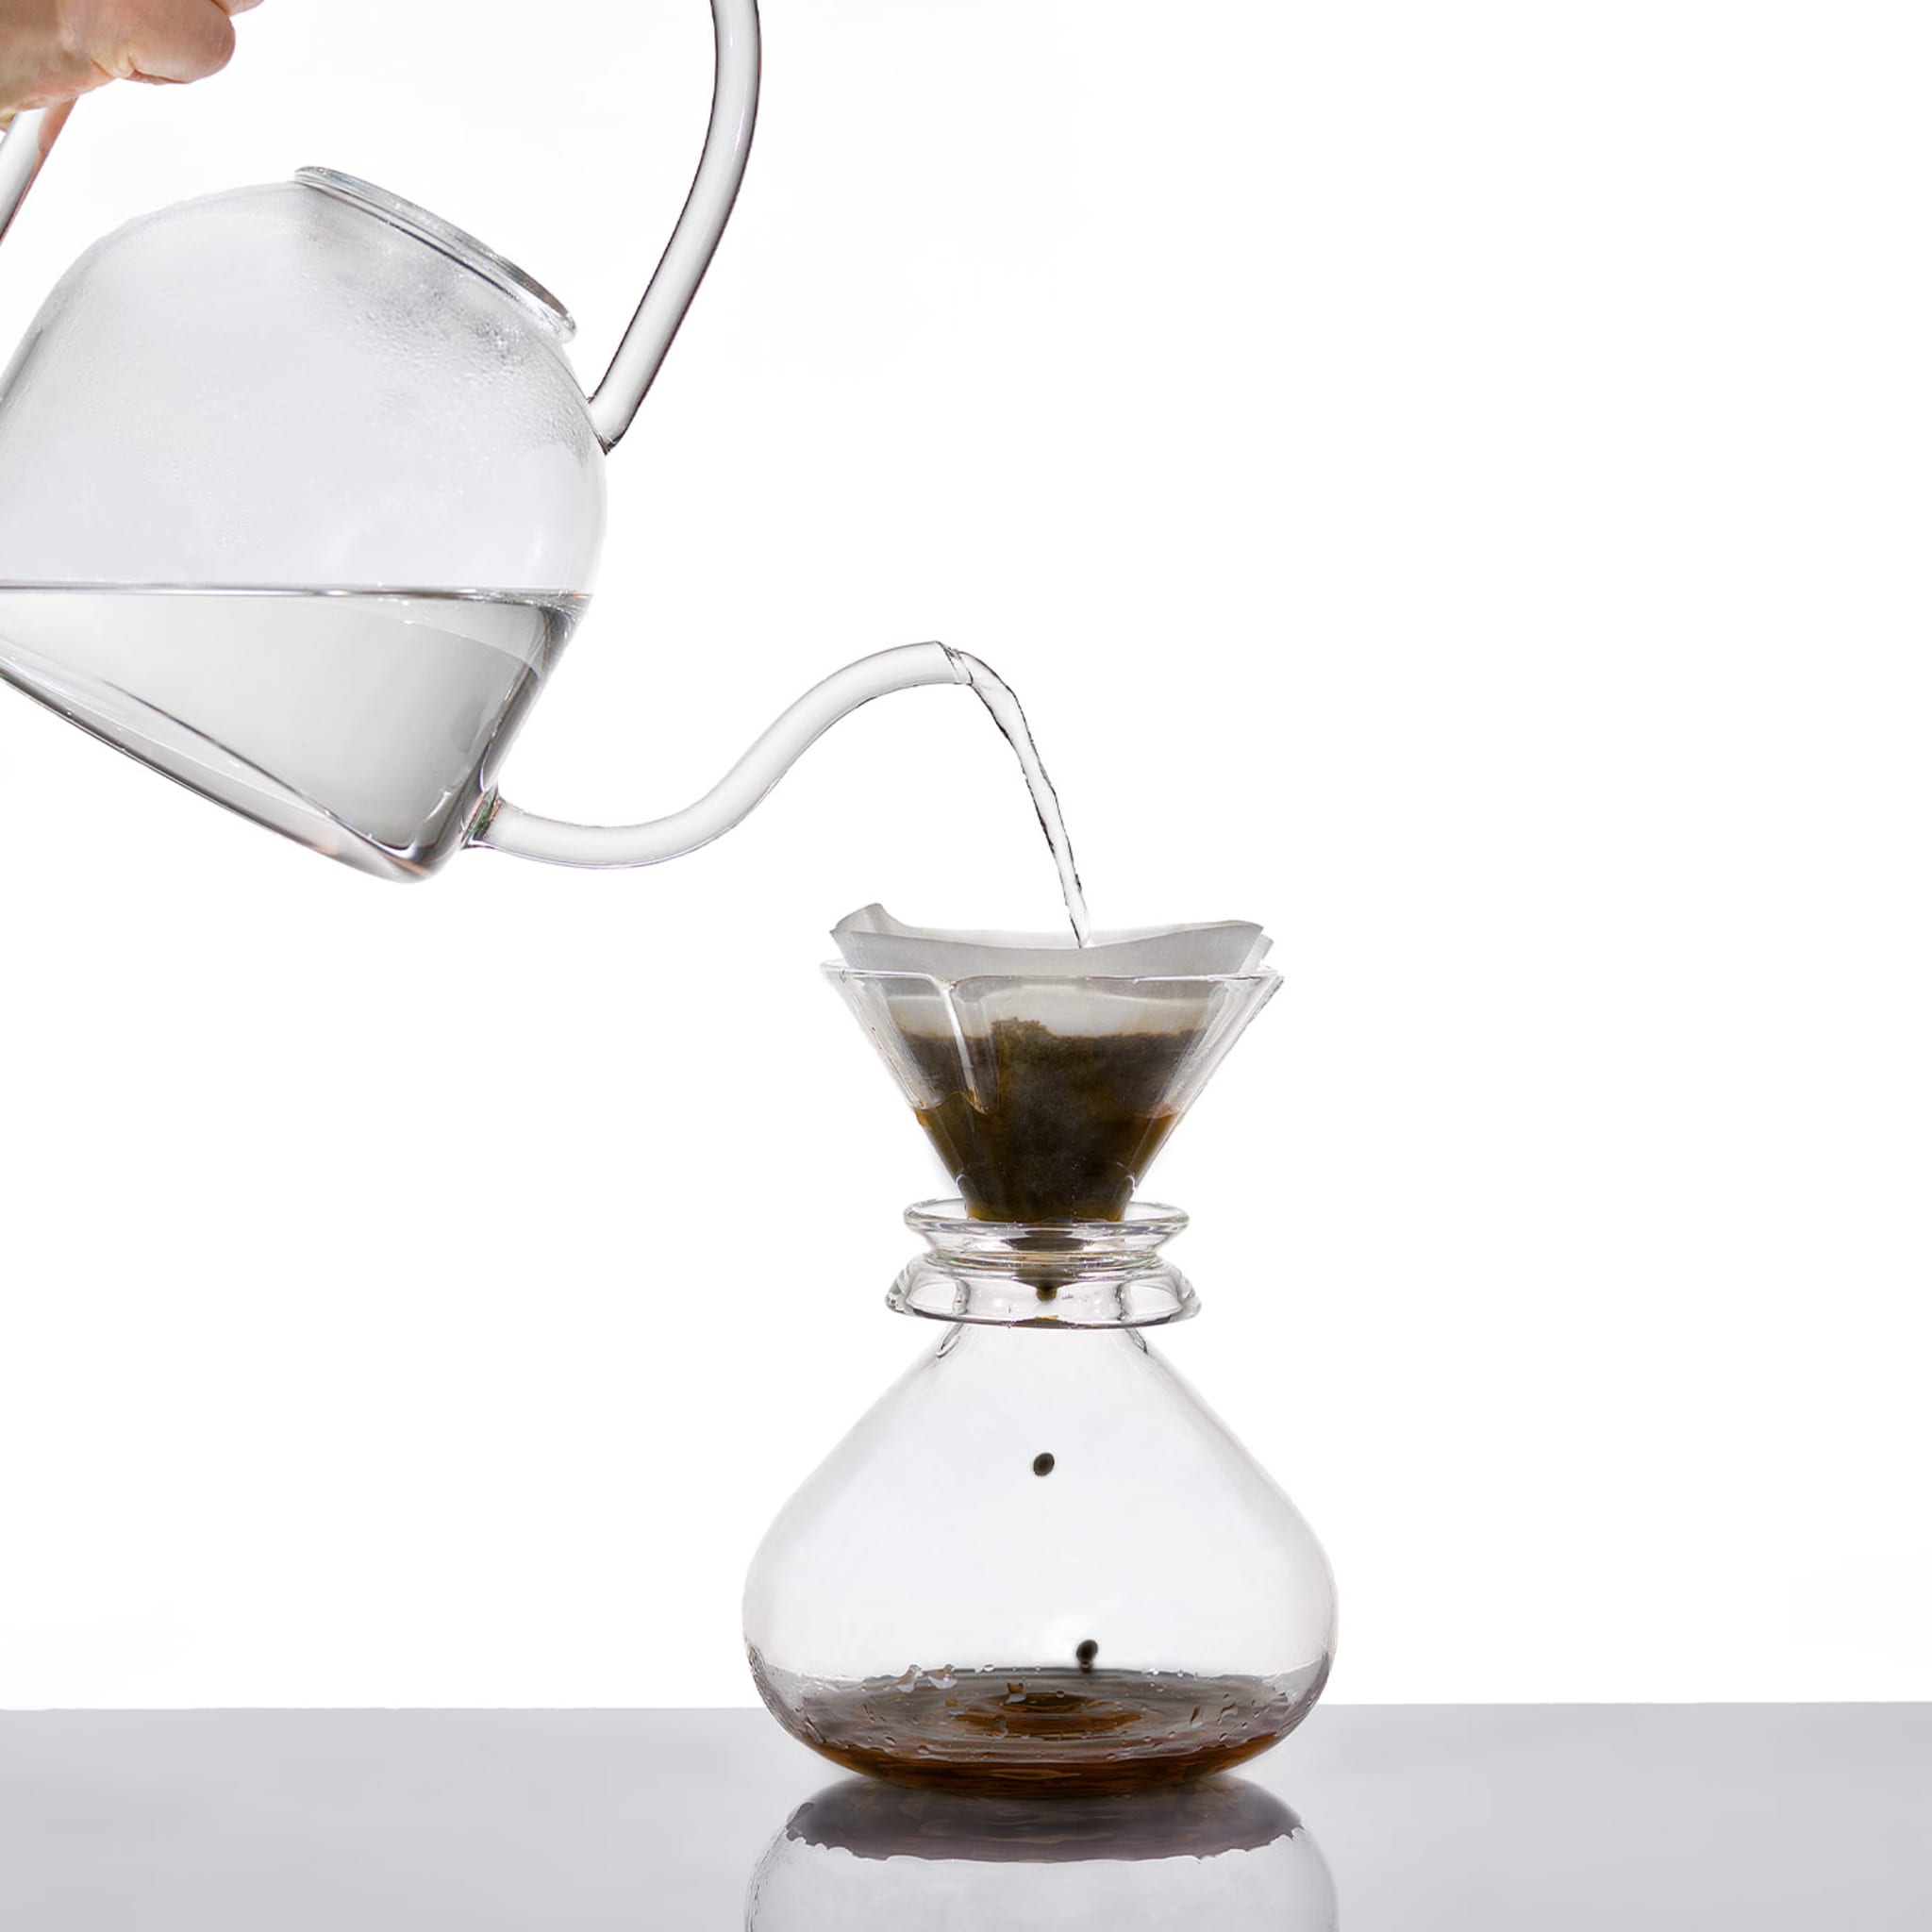 Phil Decanter Filter Coffee by Naessi Studio - Alternative view 1